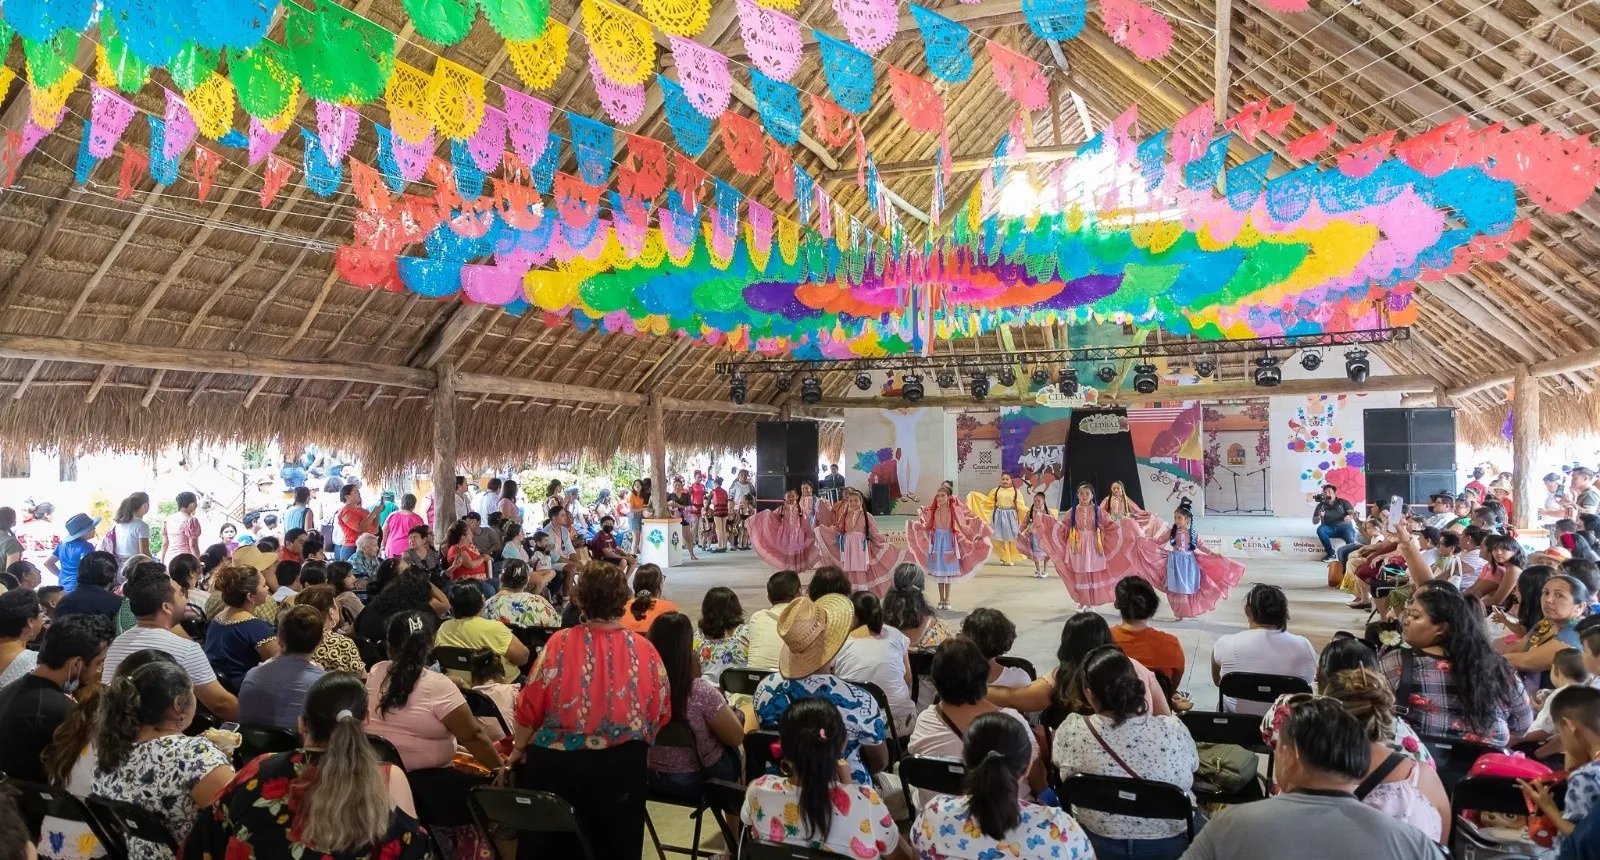 People attending a dance performance with performers in traditional attire under colorful paper decorations in an open-air pavilion.